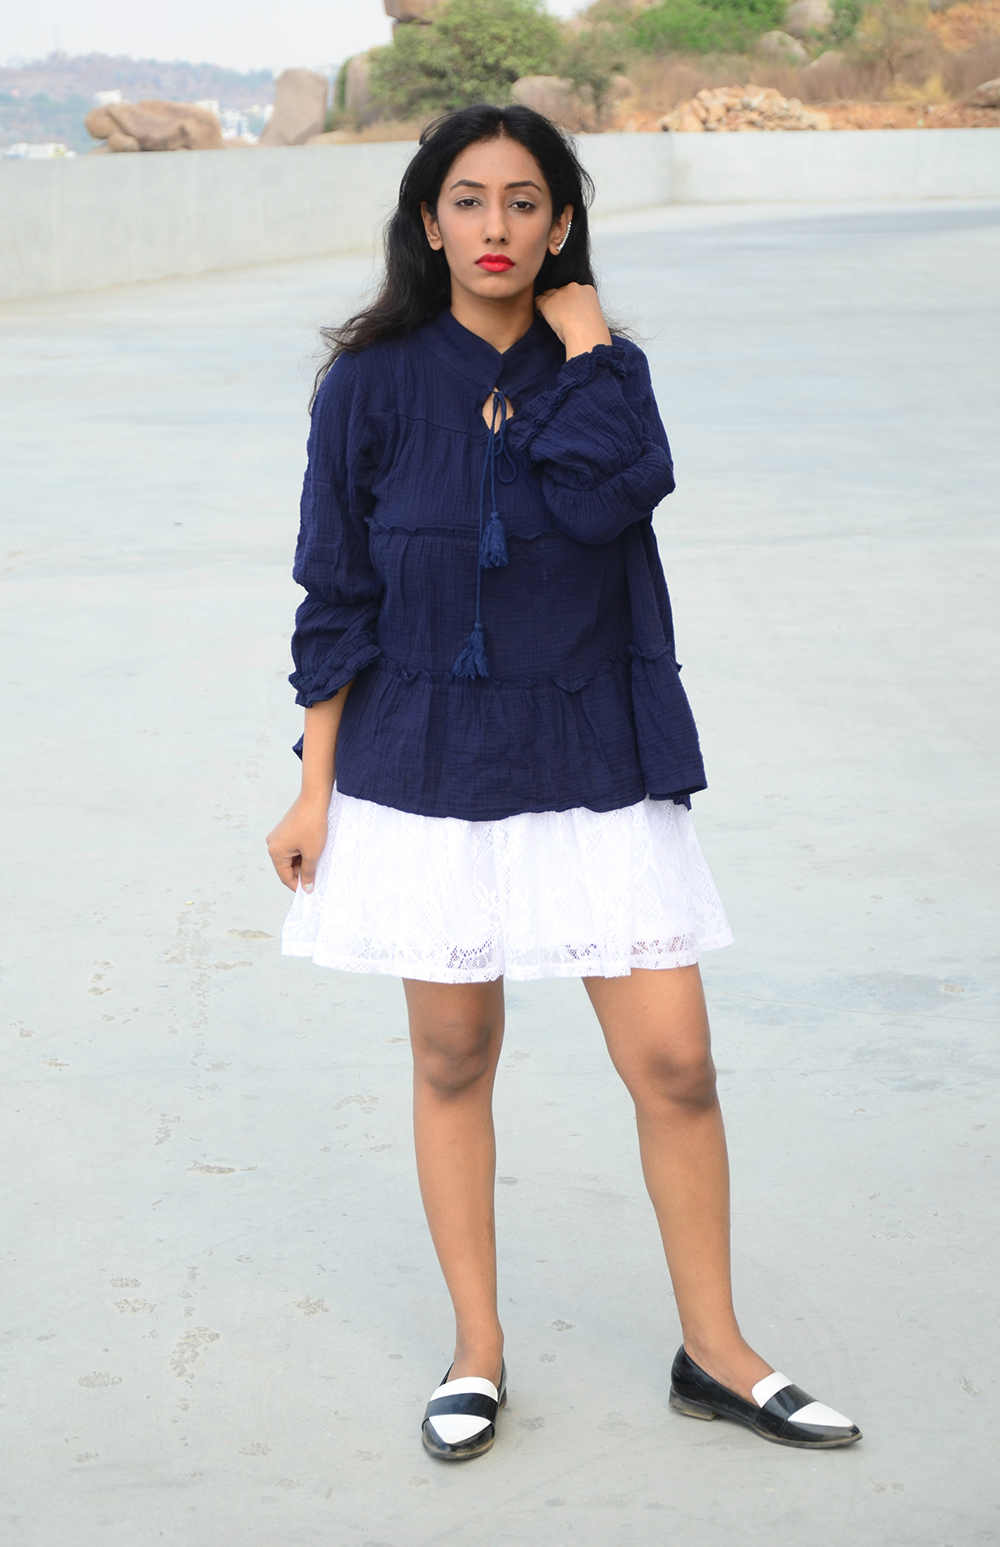 Lookbook ; Ruffle Top ; Lace; Blue ; Skirt ; Monochrome ; White ; Outfit ; One Roze Hyderabad ; Flowers ; Roses ; Hyderabad Store Launch ; Love ; Ear Cuff ; Red Lips ; Zaful ; Boohoo ; fashion photography ; dusk ; editorial ; strong ; Dark ; summer fashion ; summer outfit ; spring ; summer 17; boho look ; Naznin ; Naznin Suhaer ; dusky; model ; indian blogger ; hyderabad fashion bloggers ; hyderabad bloggers ; hyderabad fashion blogger ; I Dress for the Applause ; 